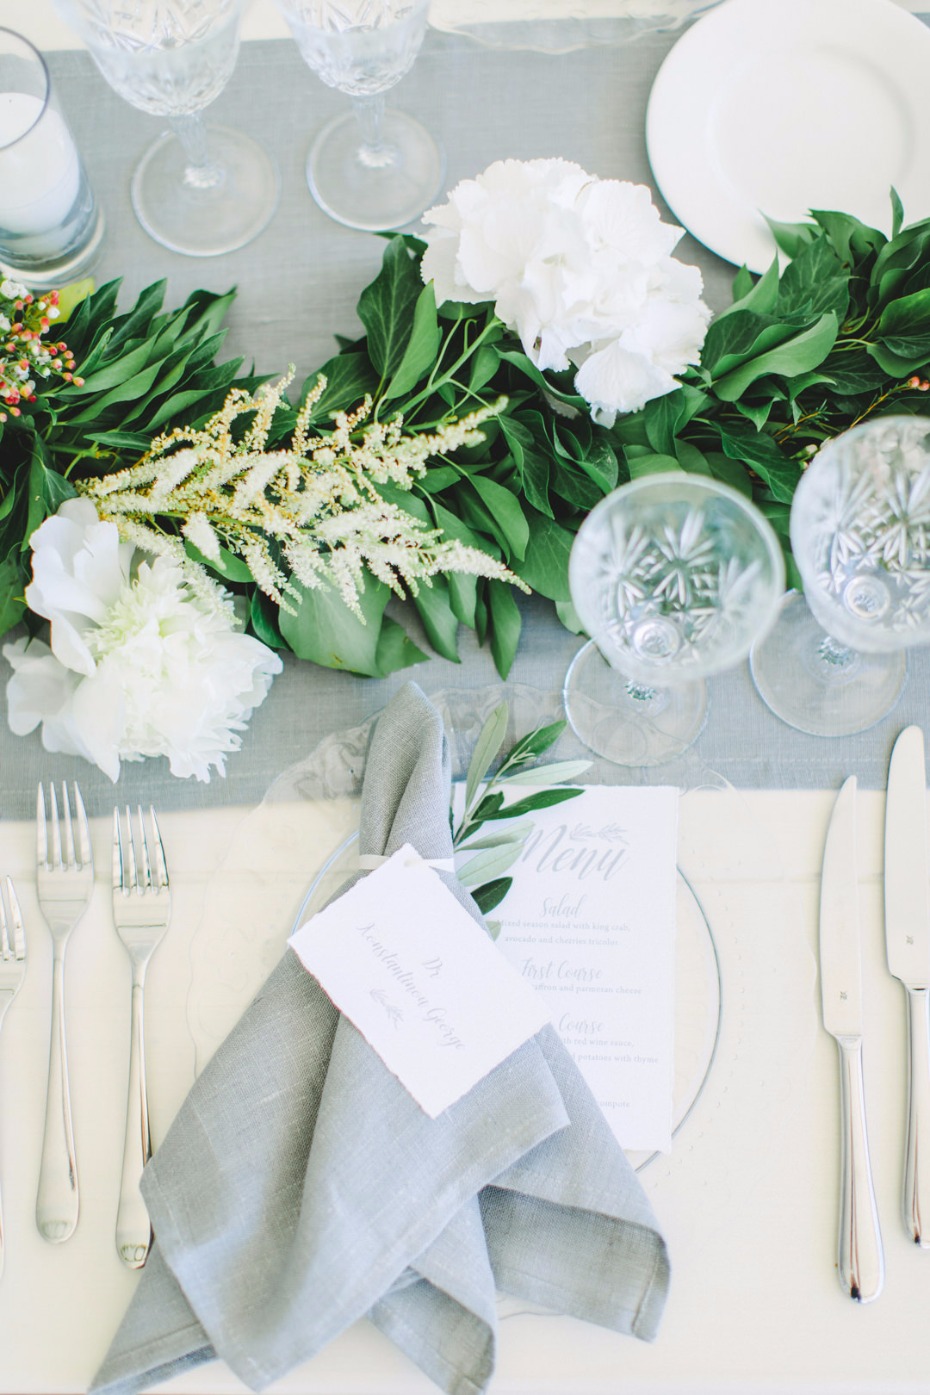 White and grey place setting with greenery